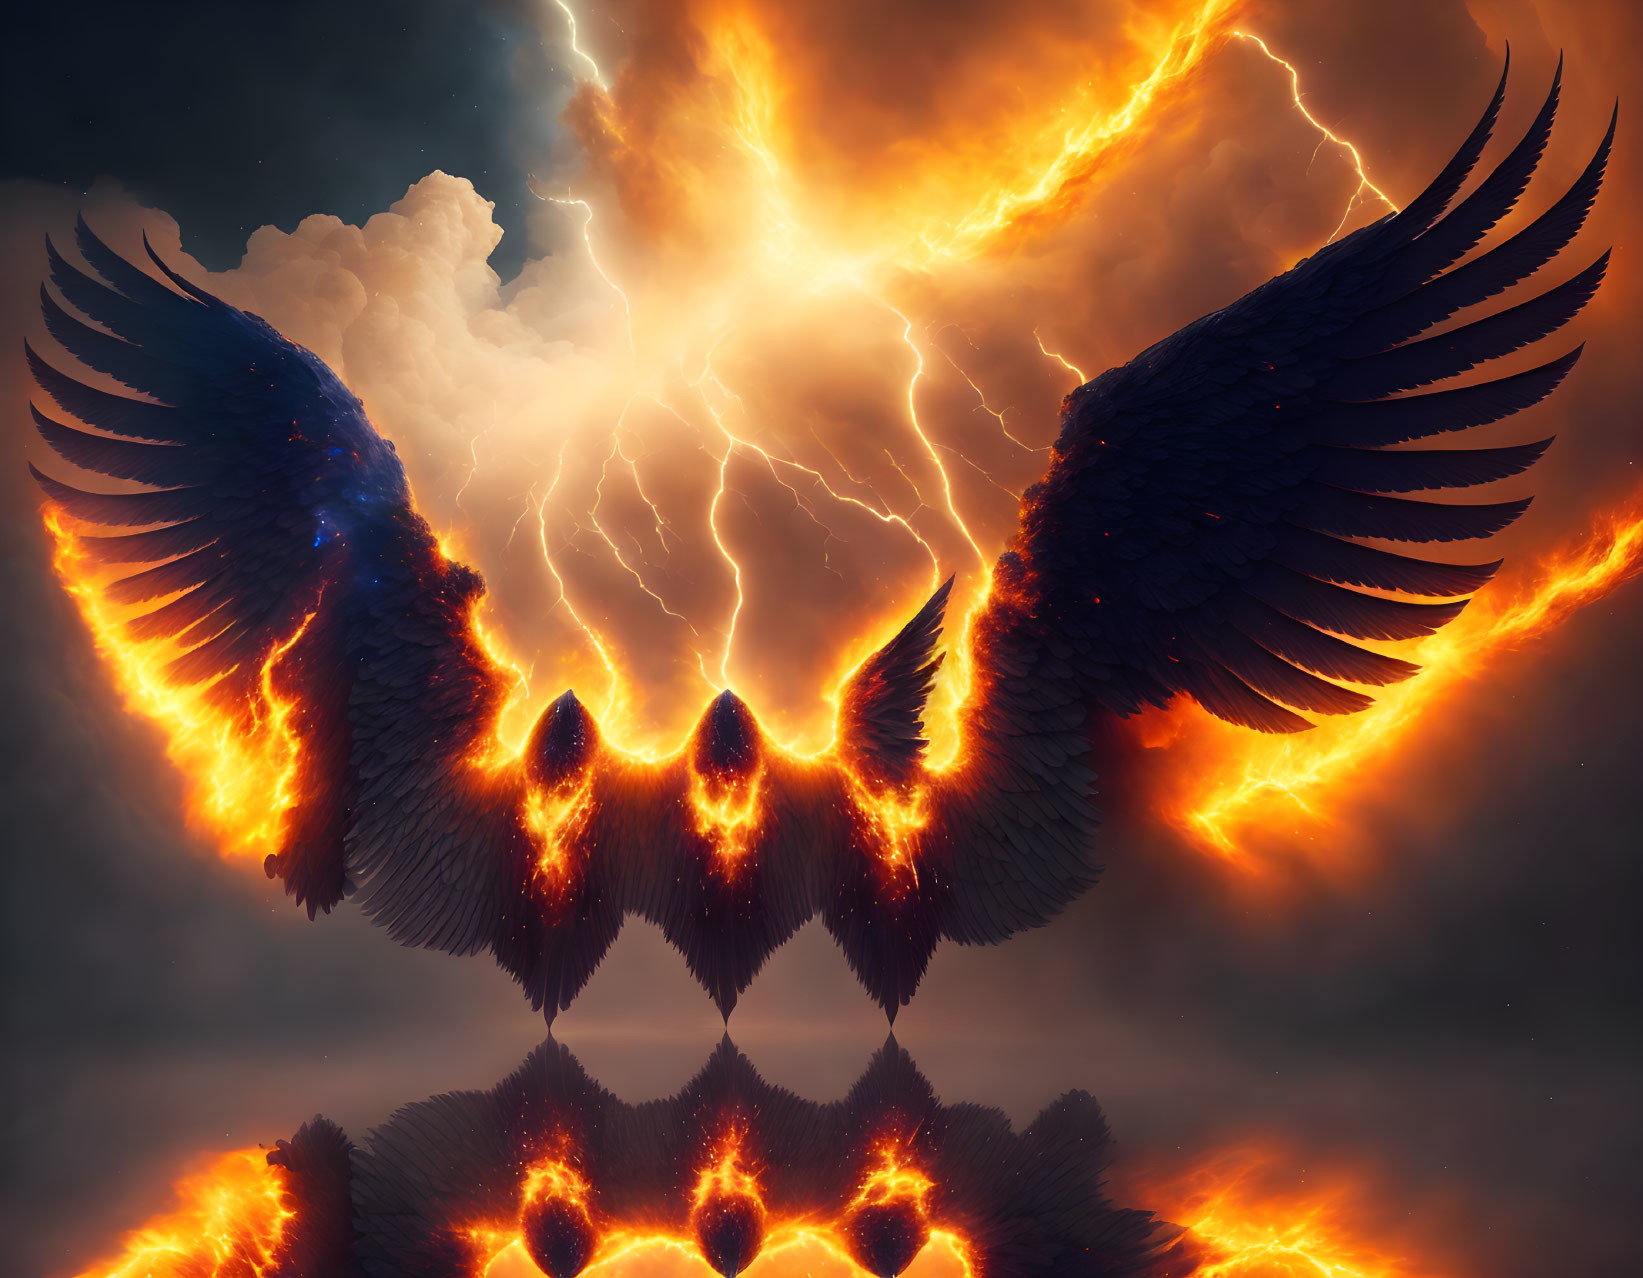 Fiery Phoenix with Spread Wings Amidst Lightning and Clouds